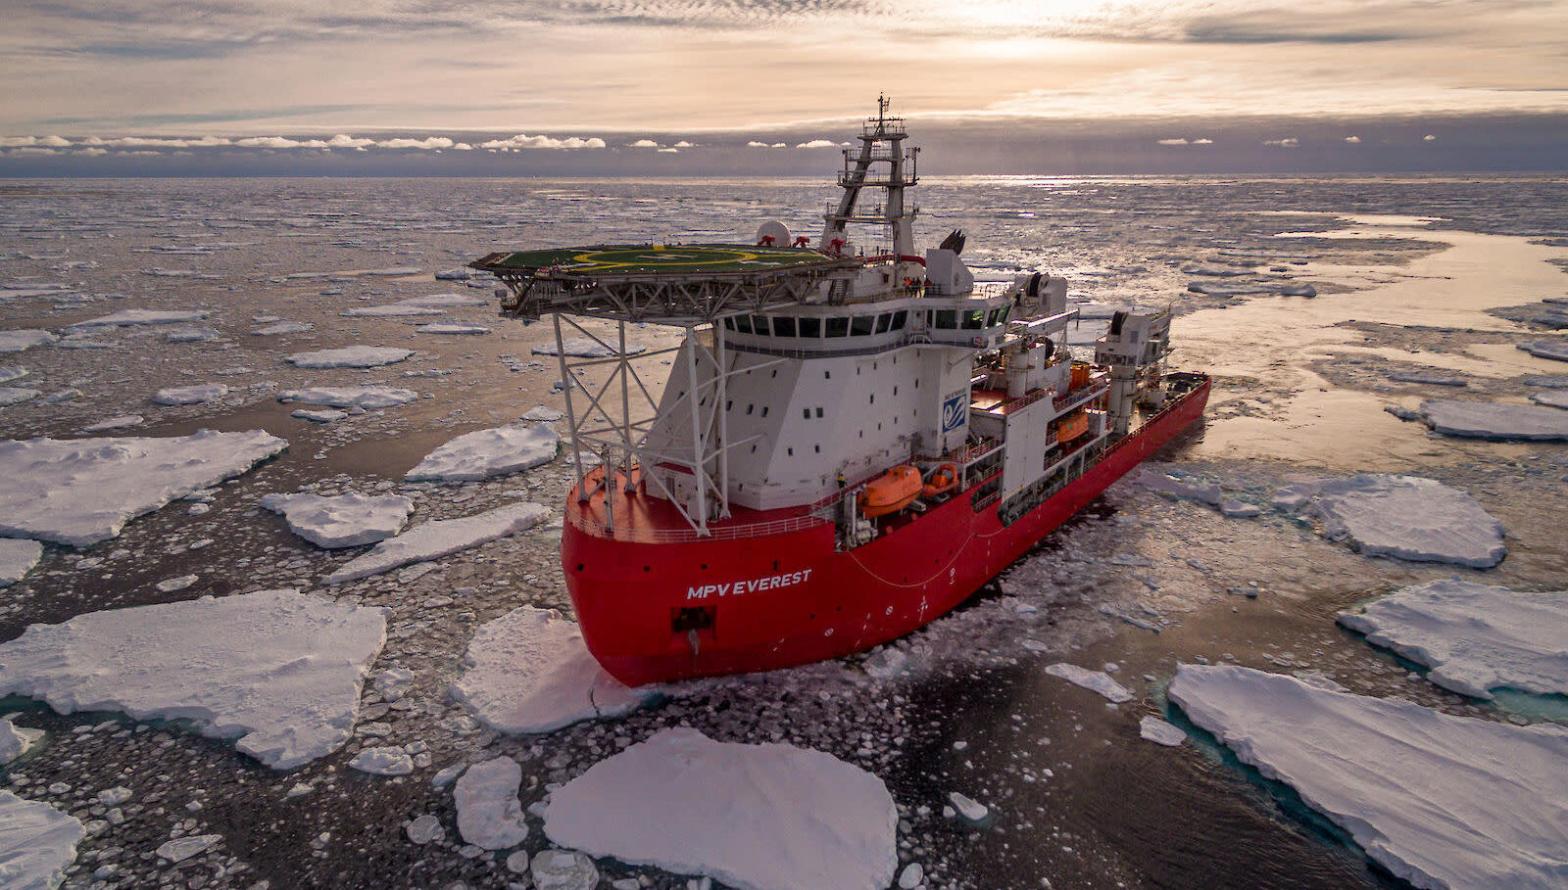 MPV Everest travelling through ice floes from Davis to Mawson stations. (Image: Wayde Maurer/Australian Antarctic Division)